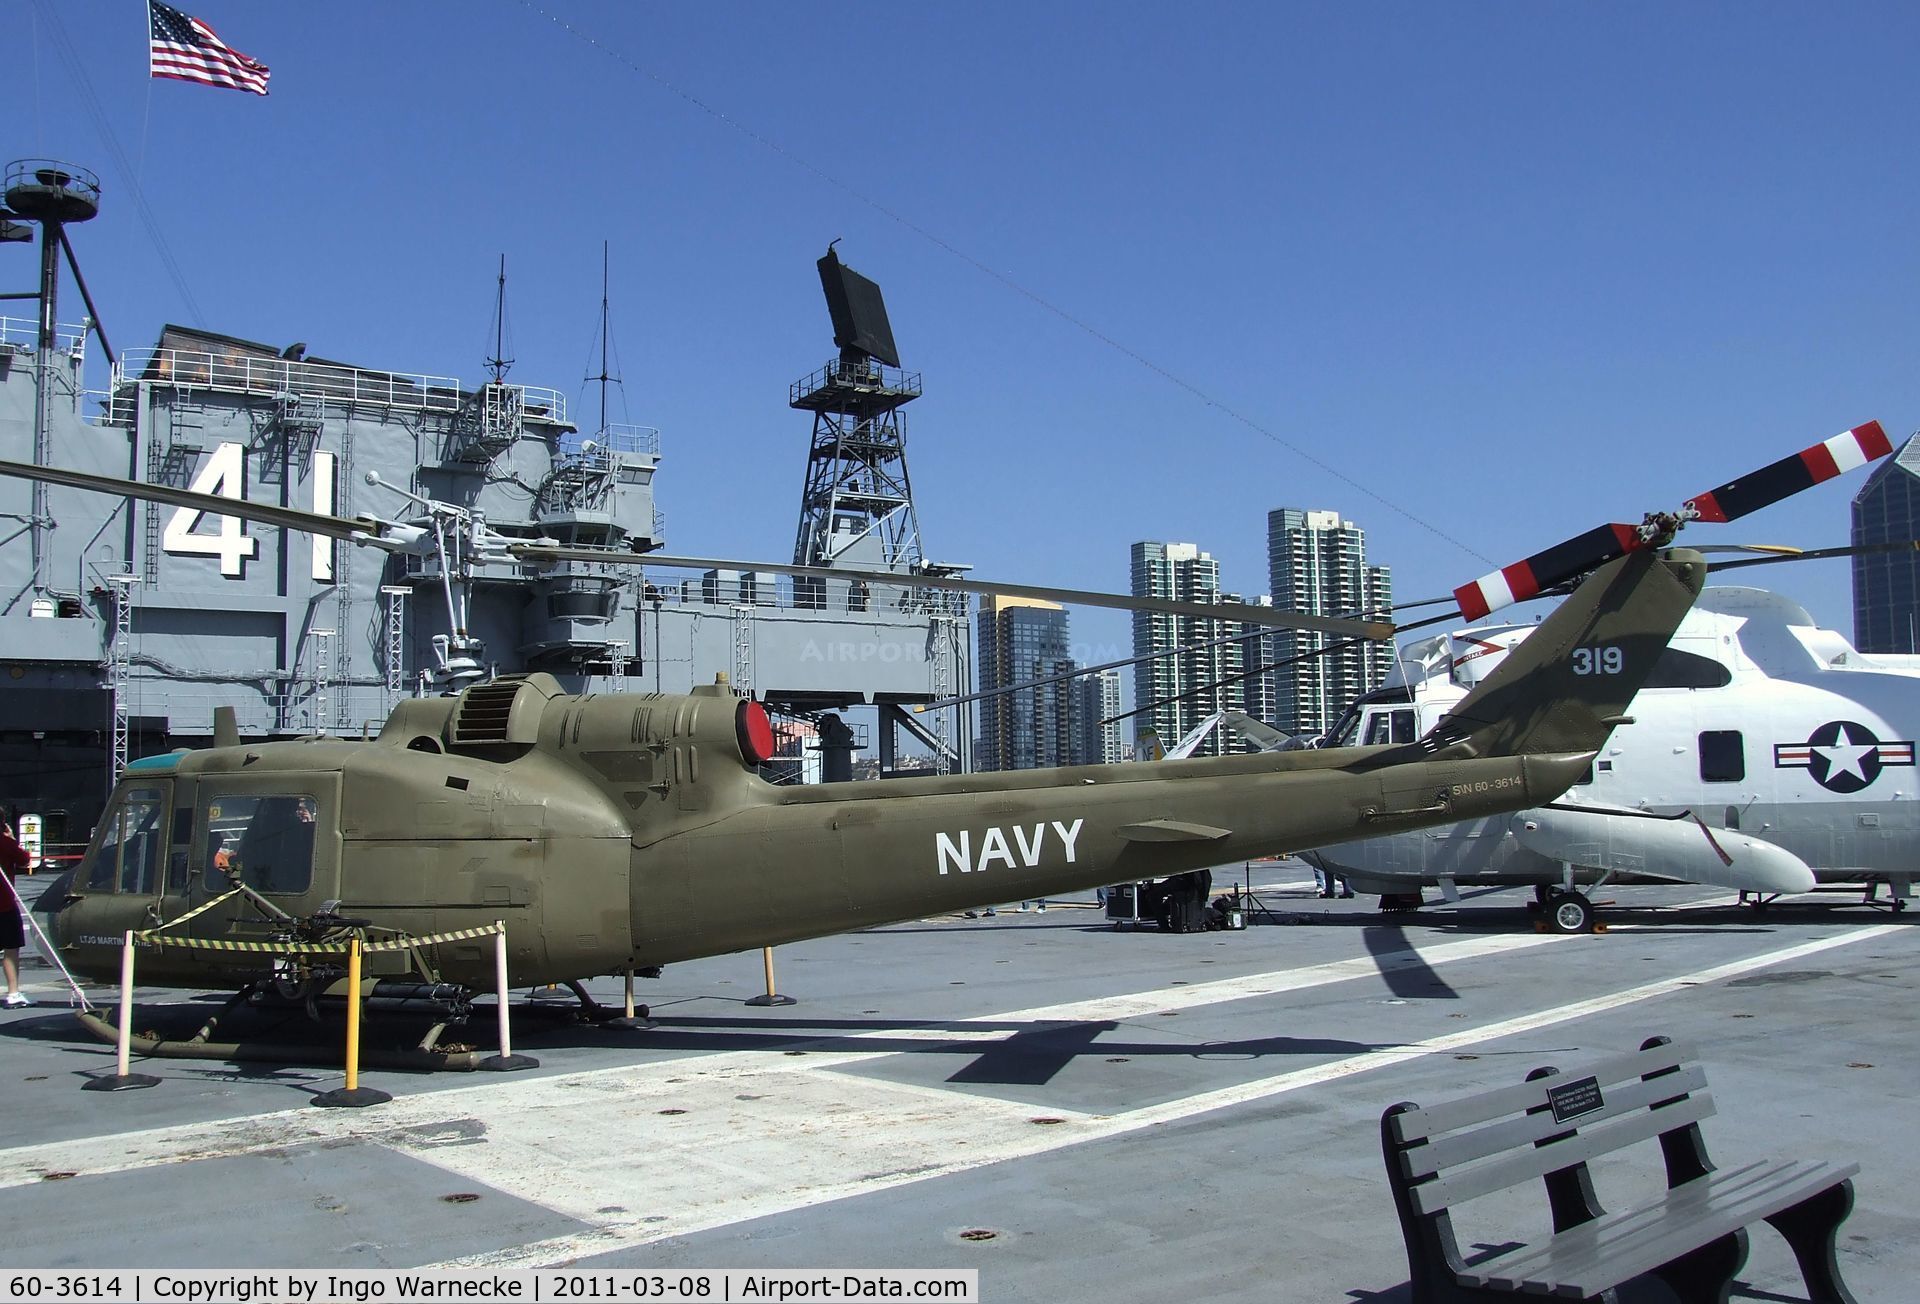 60-3614, 1960 Bell UH-1B Iroquois C/N 260, Bell UH-1B Iroquois on the flight deck of the USS Midway Museum, San Diego CA